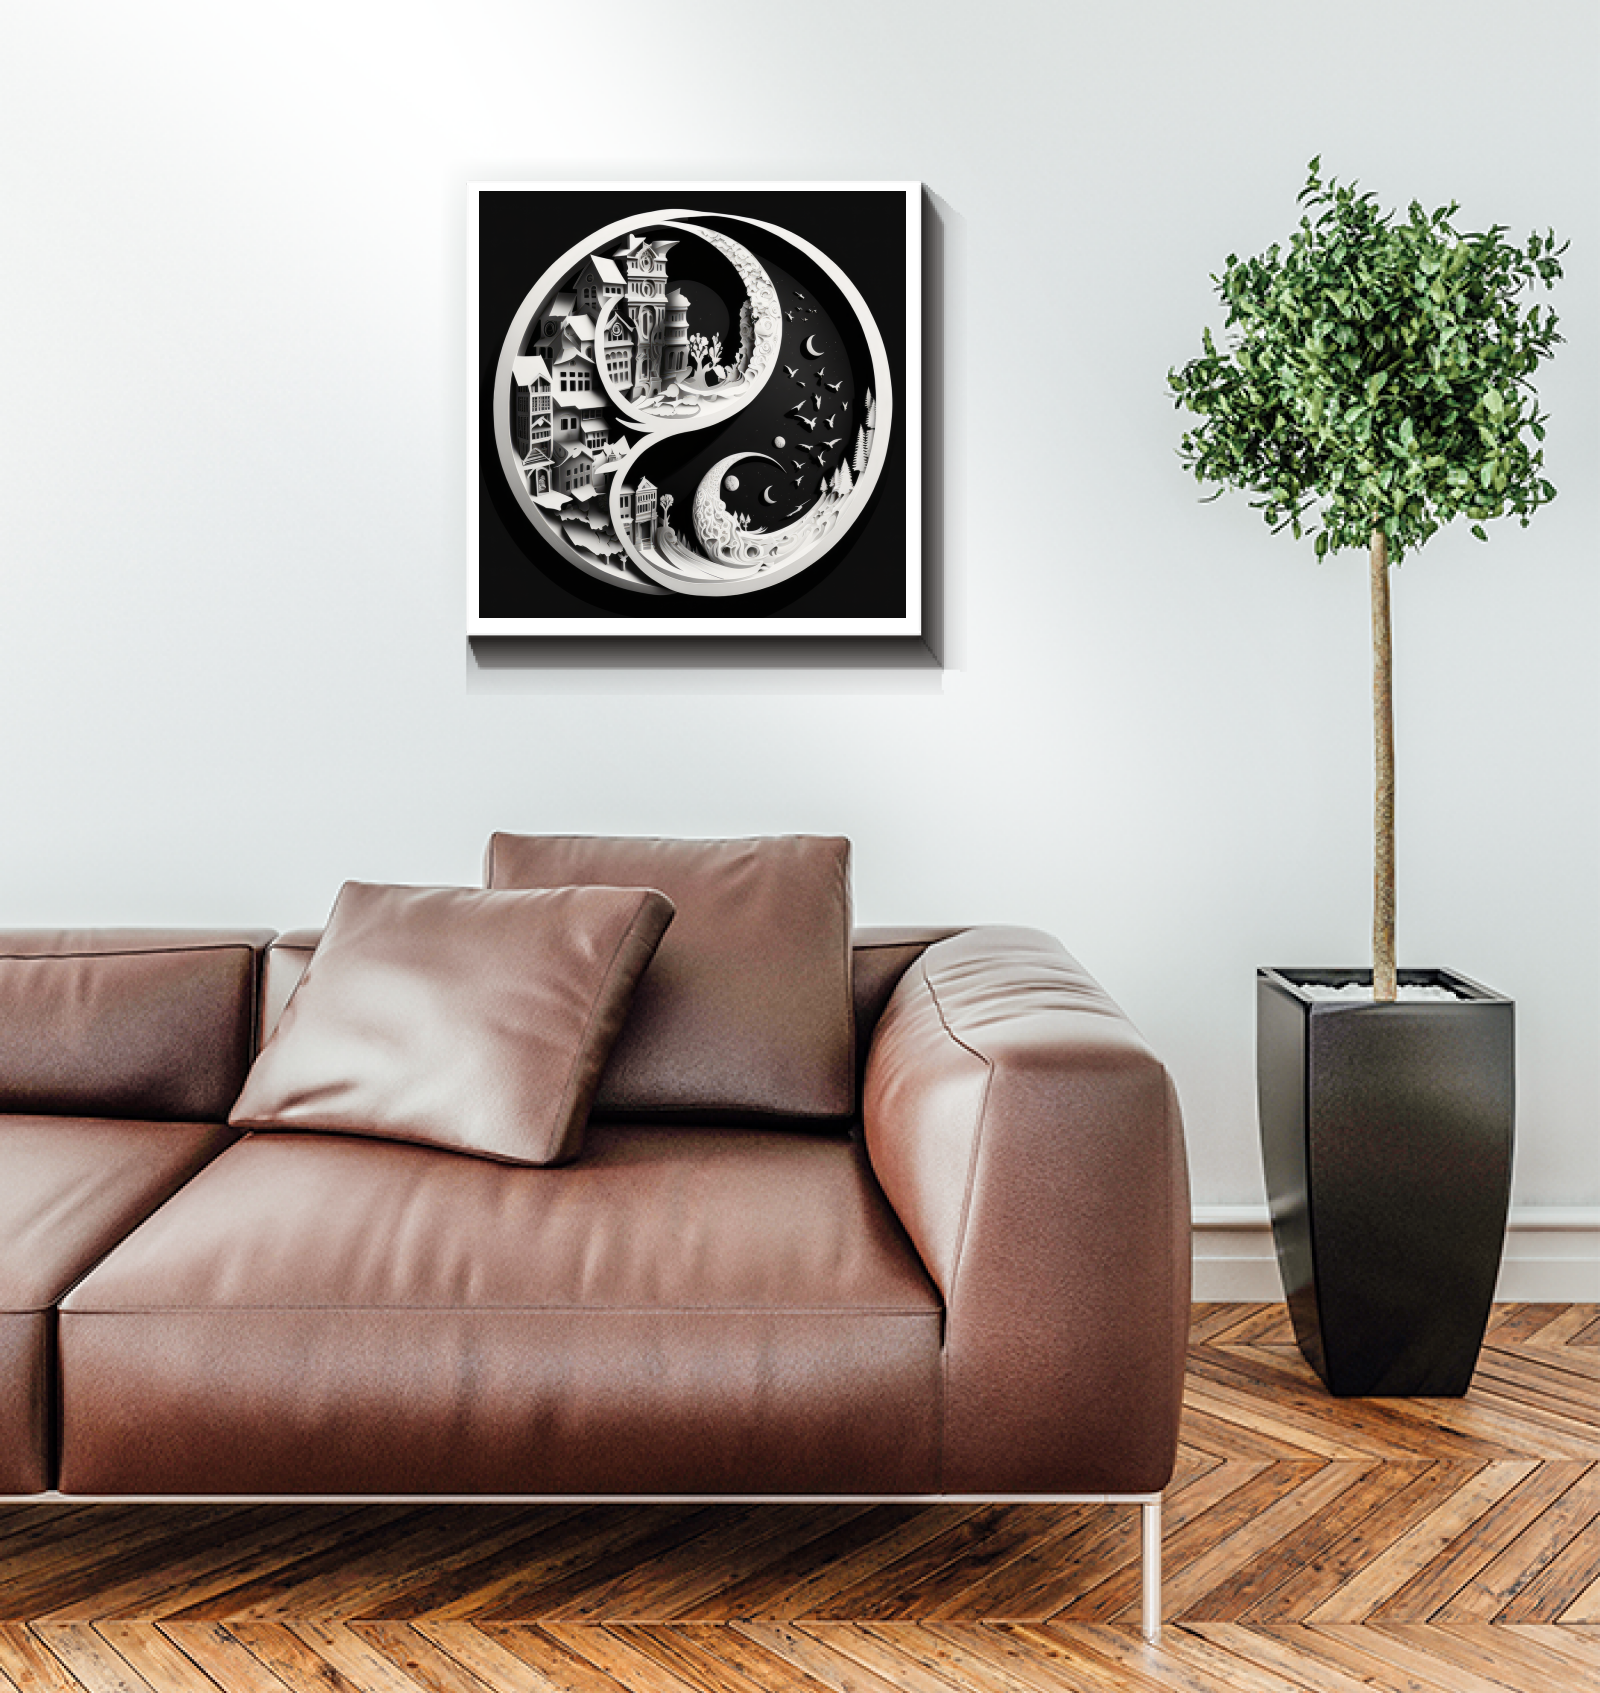 Stride and Pause art piece for modern home decor.